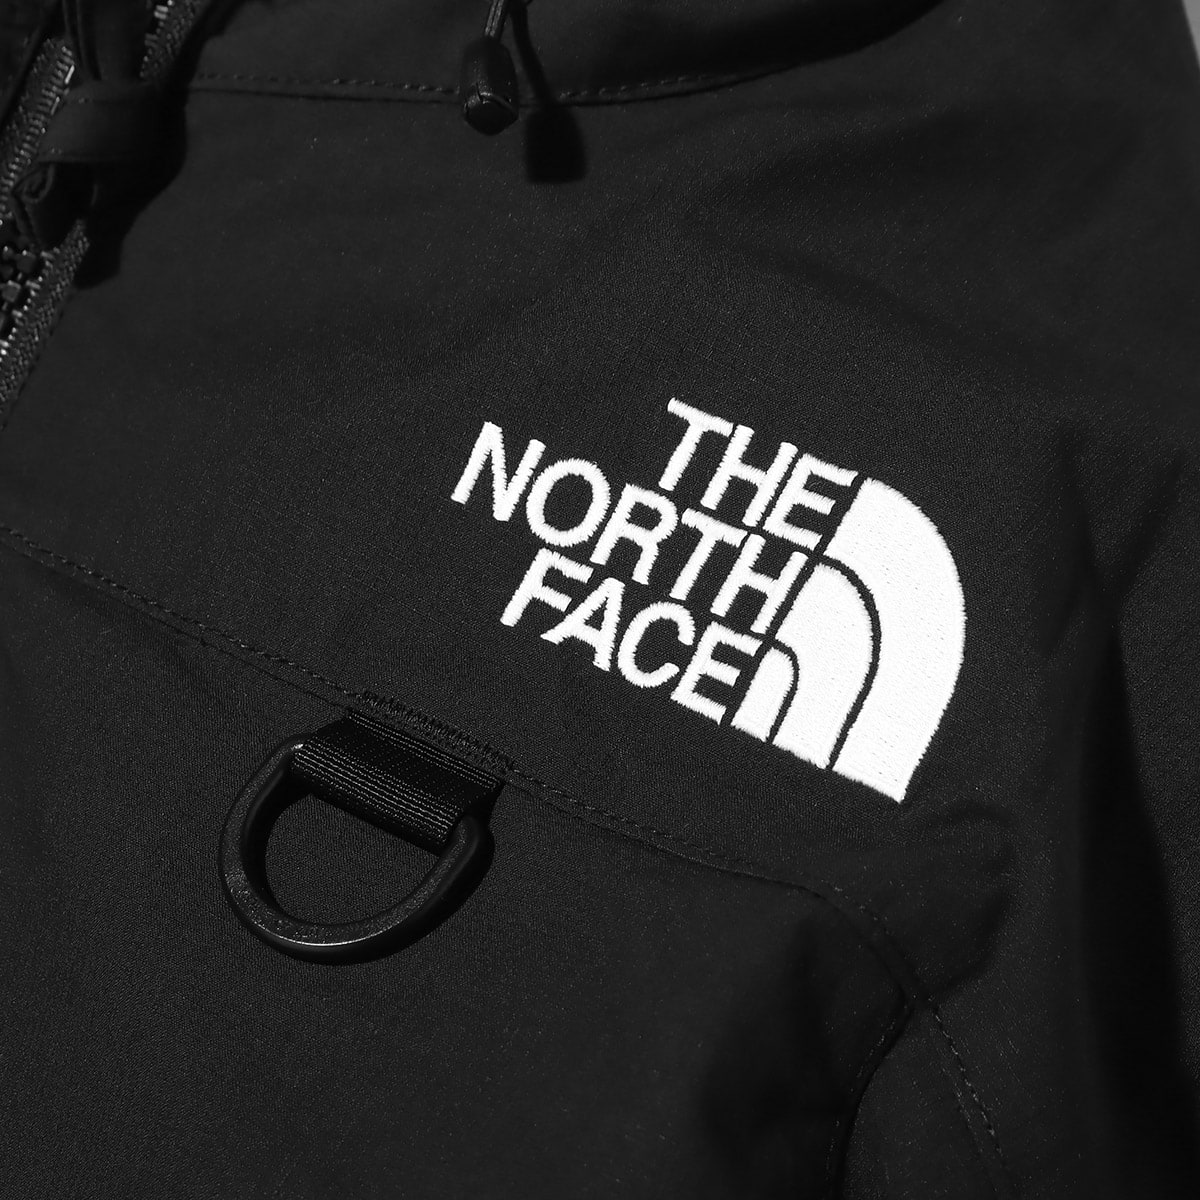 THE NORTH FACE FIREFLY INSULATED PARKA ブラック 22FW-I